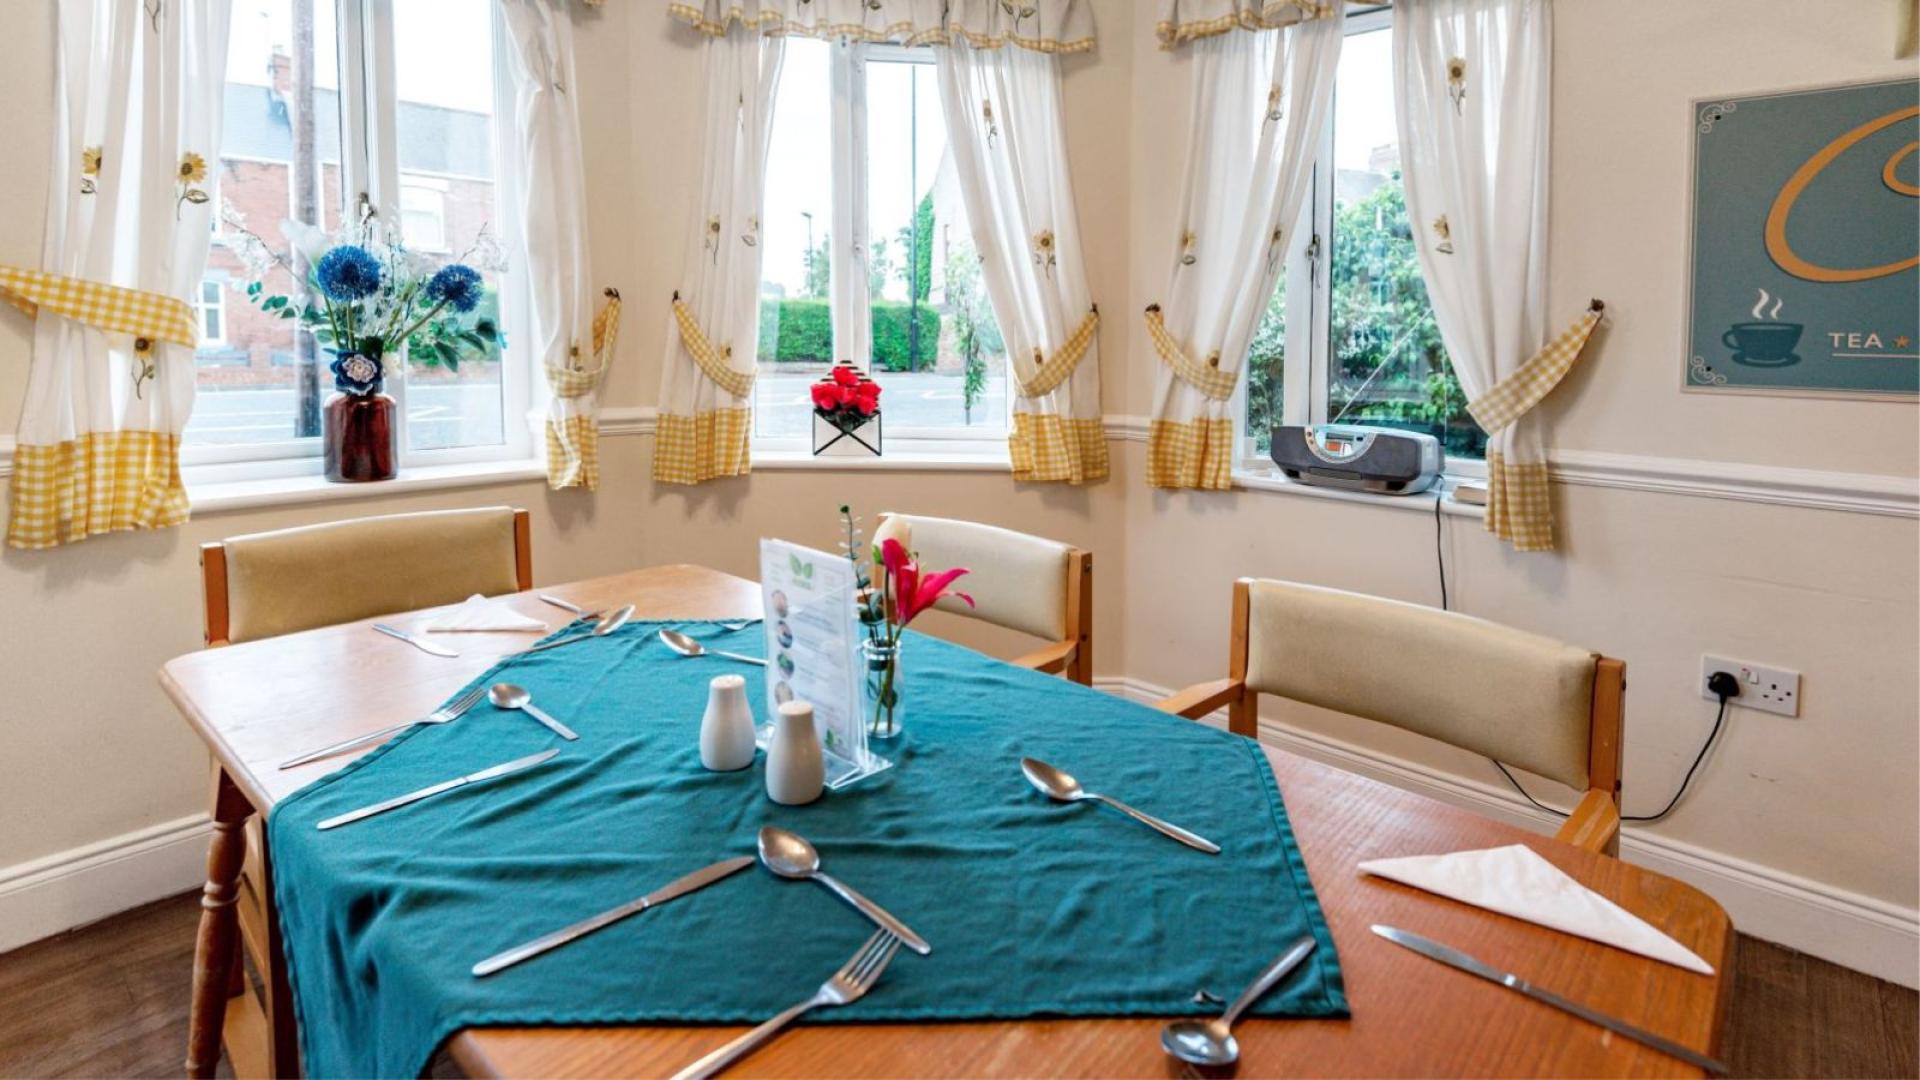 Dining room at Paddock Stile Manor Dementia Care Home in Houghton-le-Spring